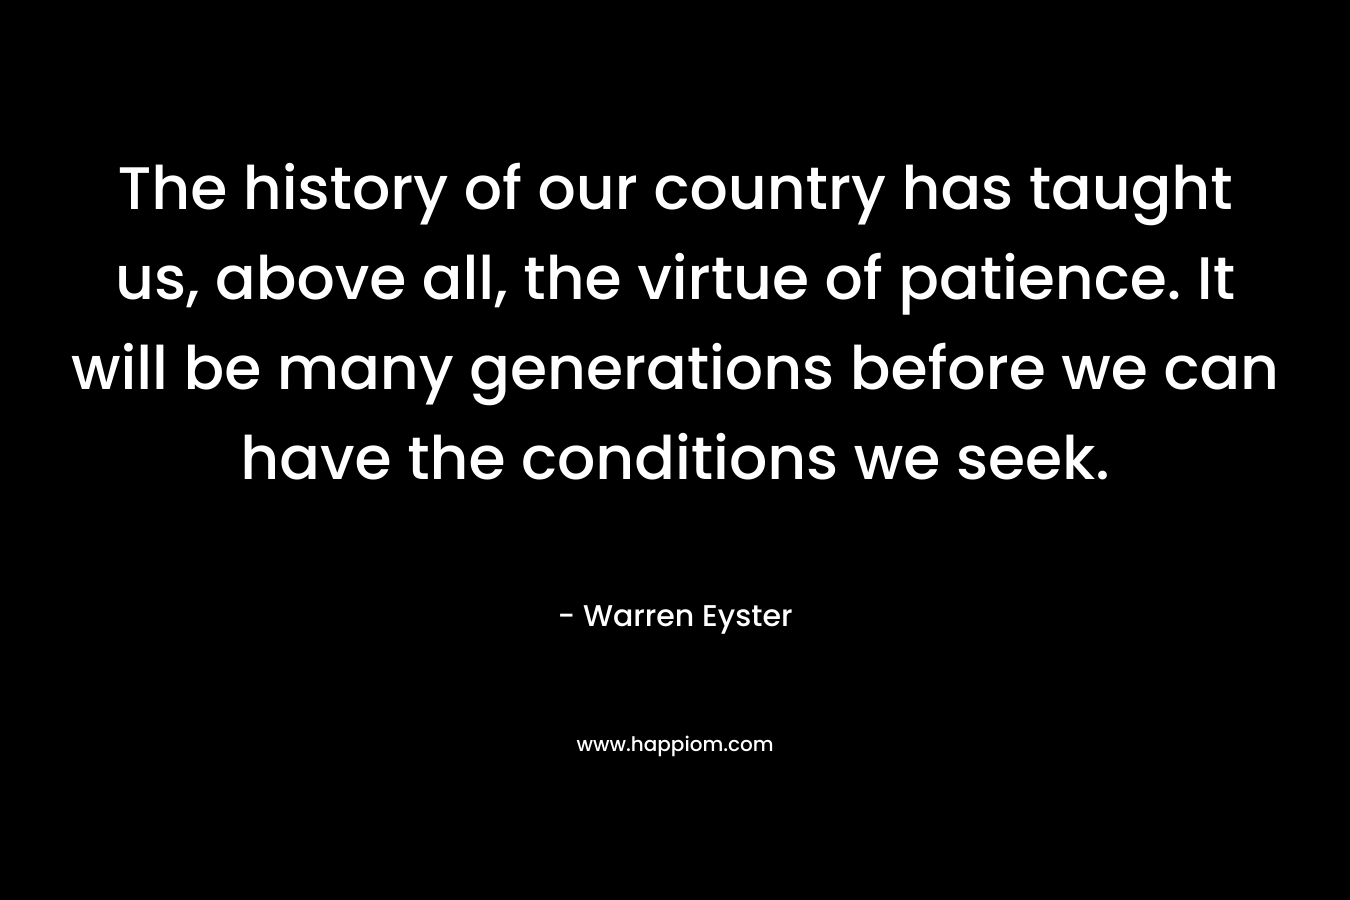 The history of our country has taught us, above all, the virtue of patience. It will be many generations before we can have the conditions we seek. – Warren Eyster